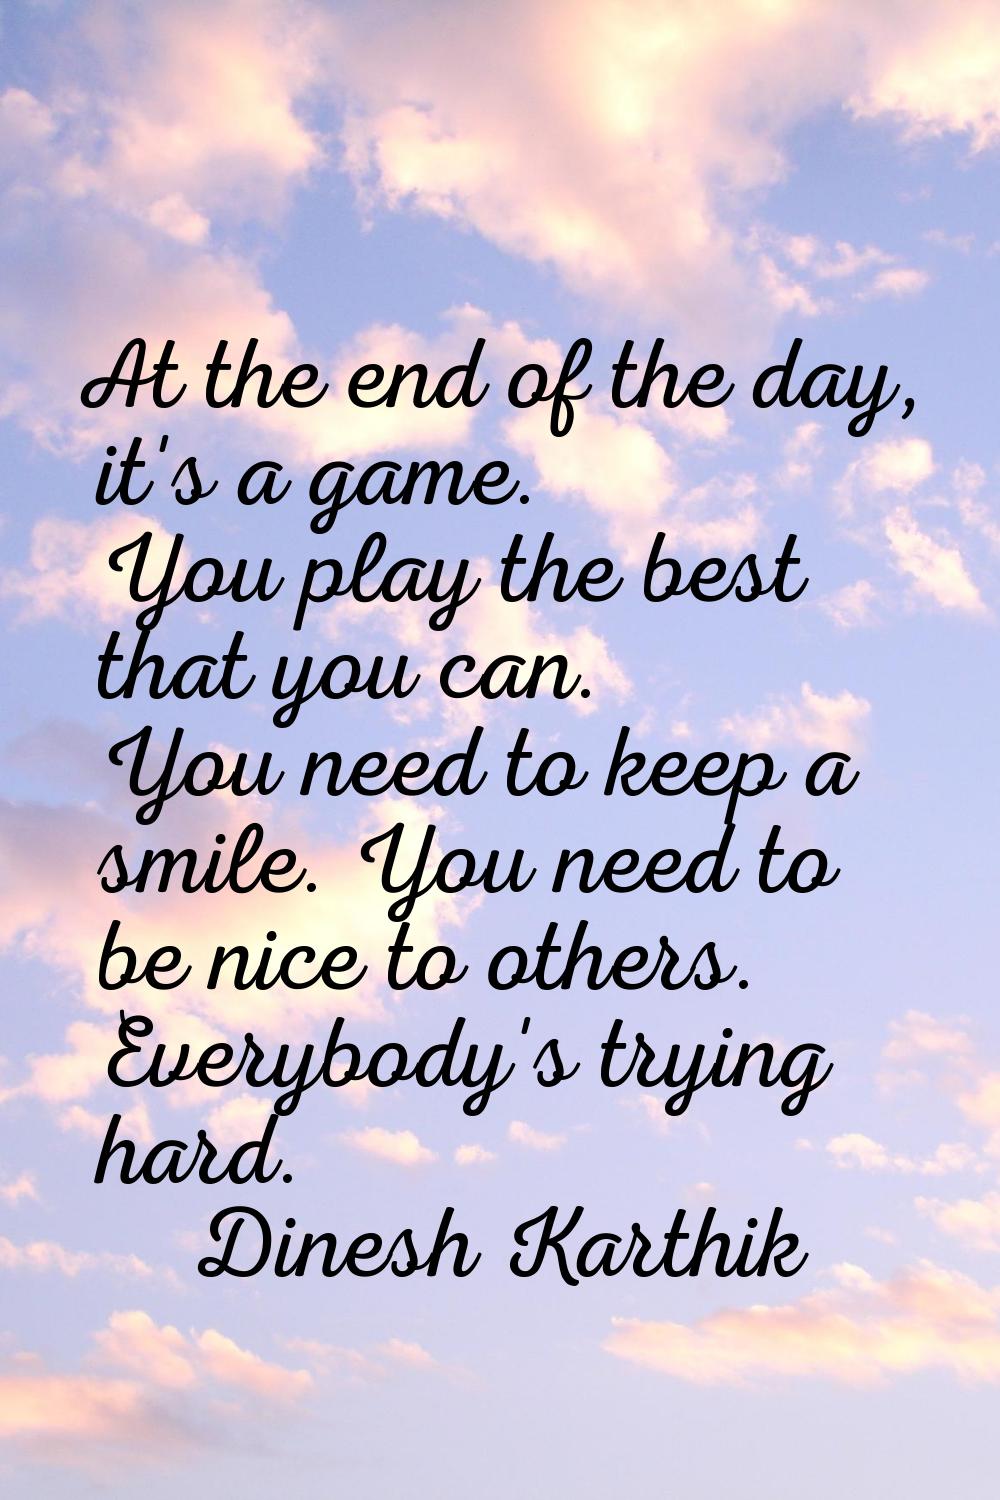 At the end of the day, it's a game. You play the best that you can. You need to keep a smile. You n